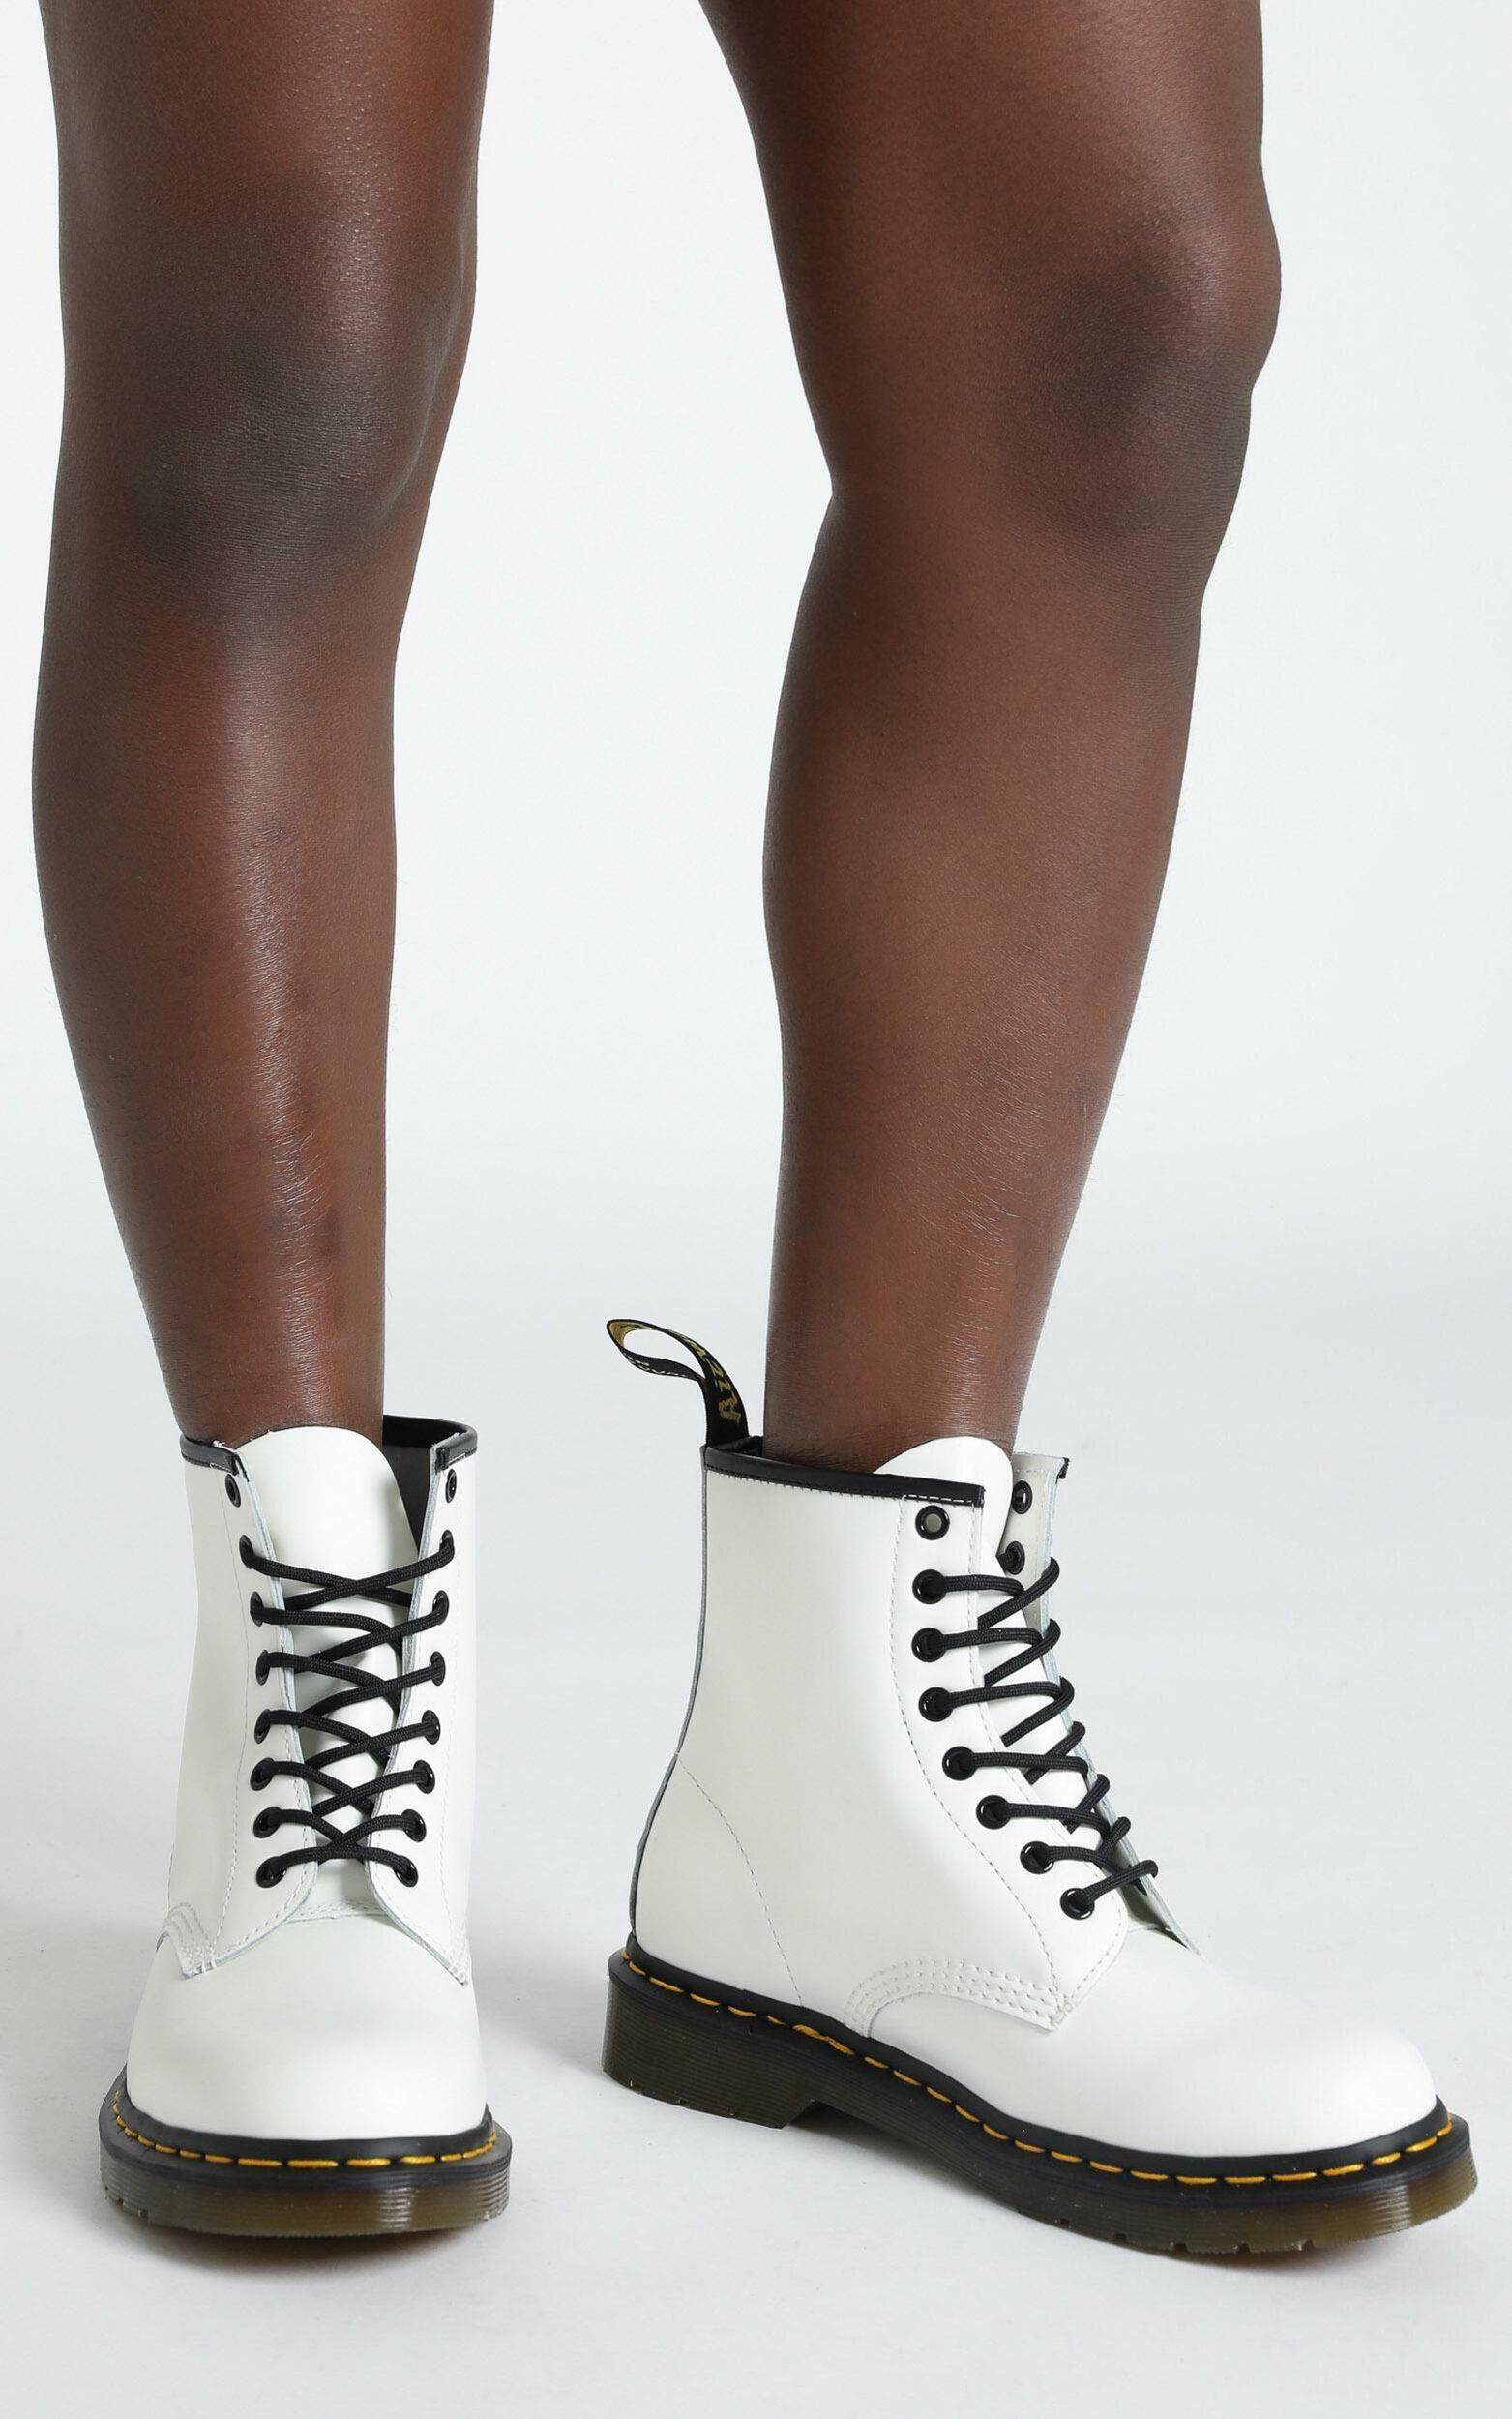 Dr Martens 1460 Boots - White Smooth